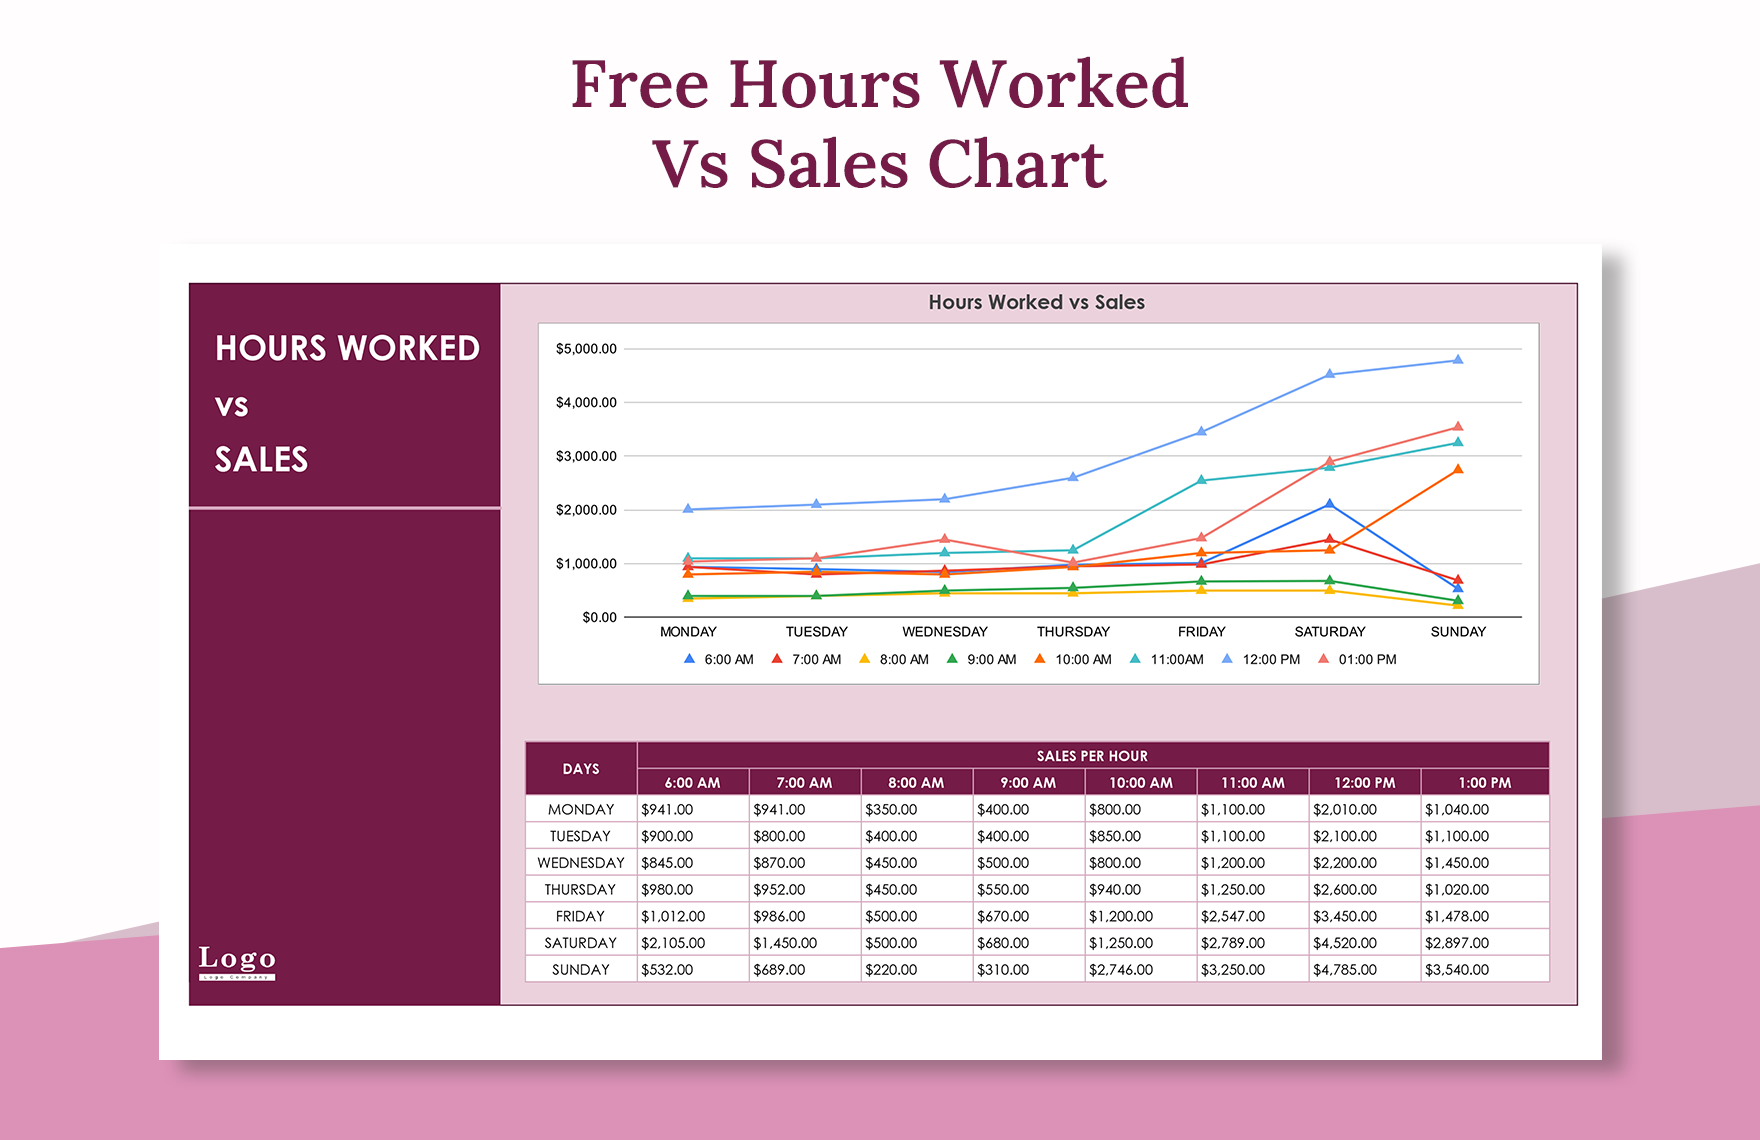 Free Hours Worked Vs Sales Chart